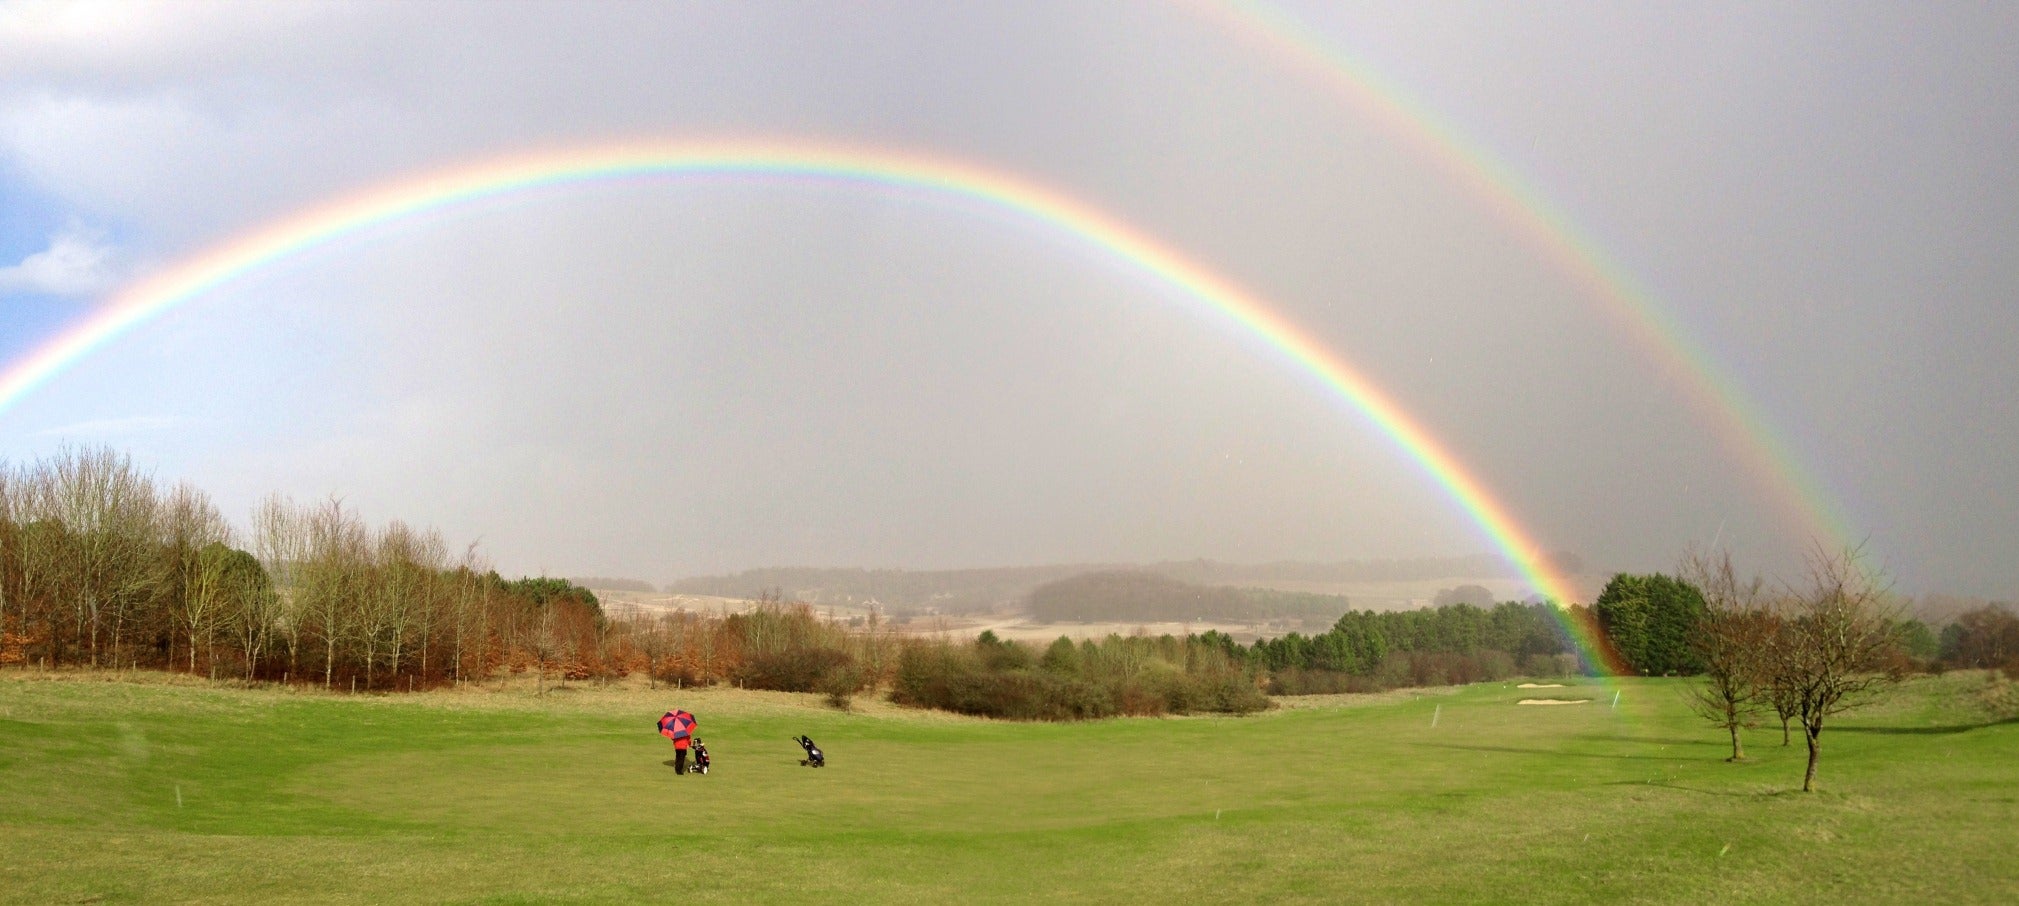 A double rainbow appears over the SP9 postcode of Tidworth in Wiltshire